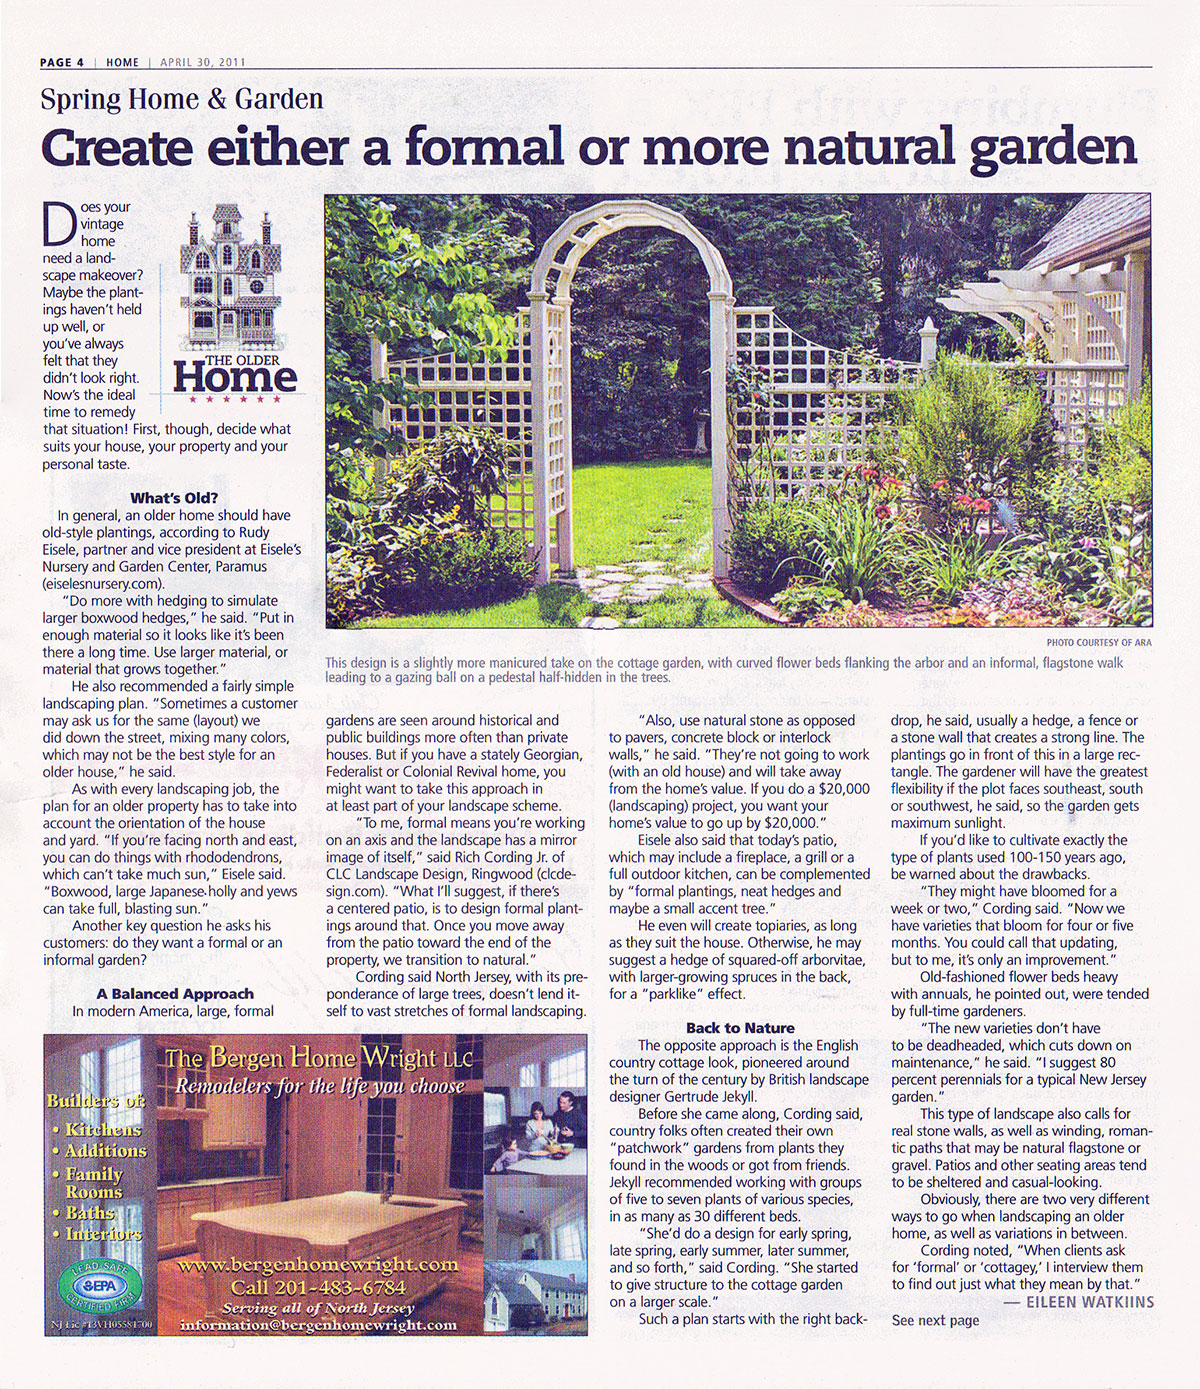 The Record - Formal or Semi-Formal Garden (page 1)